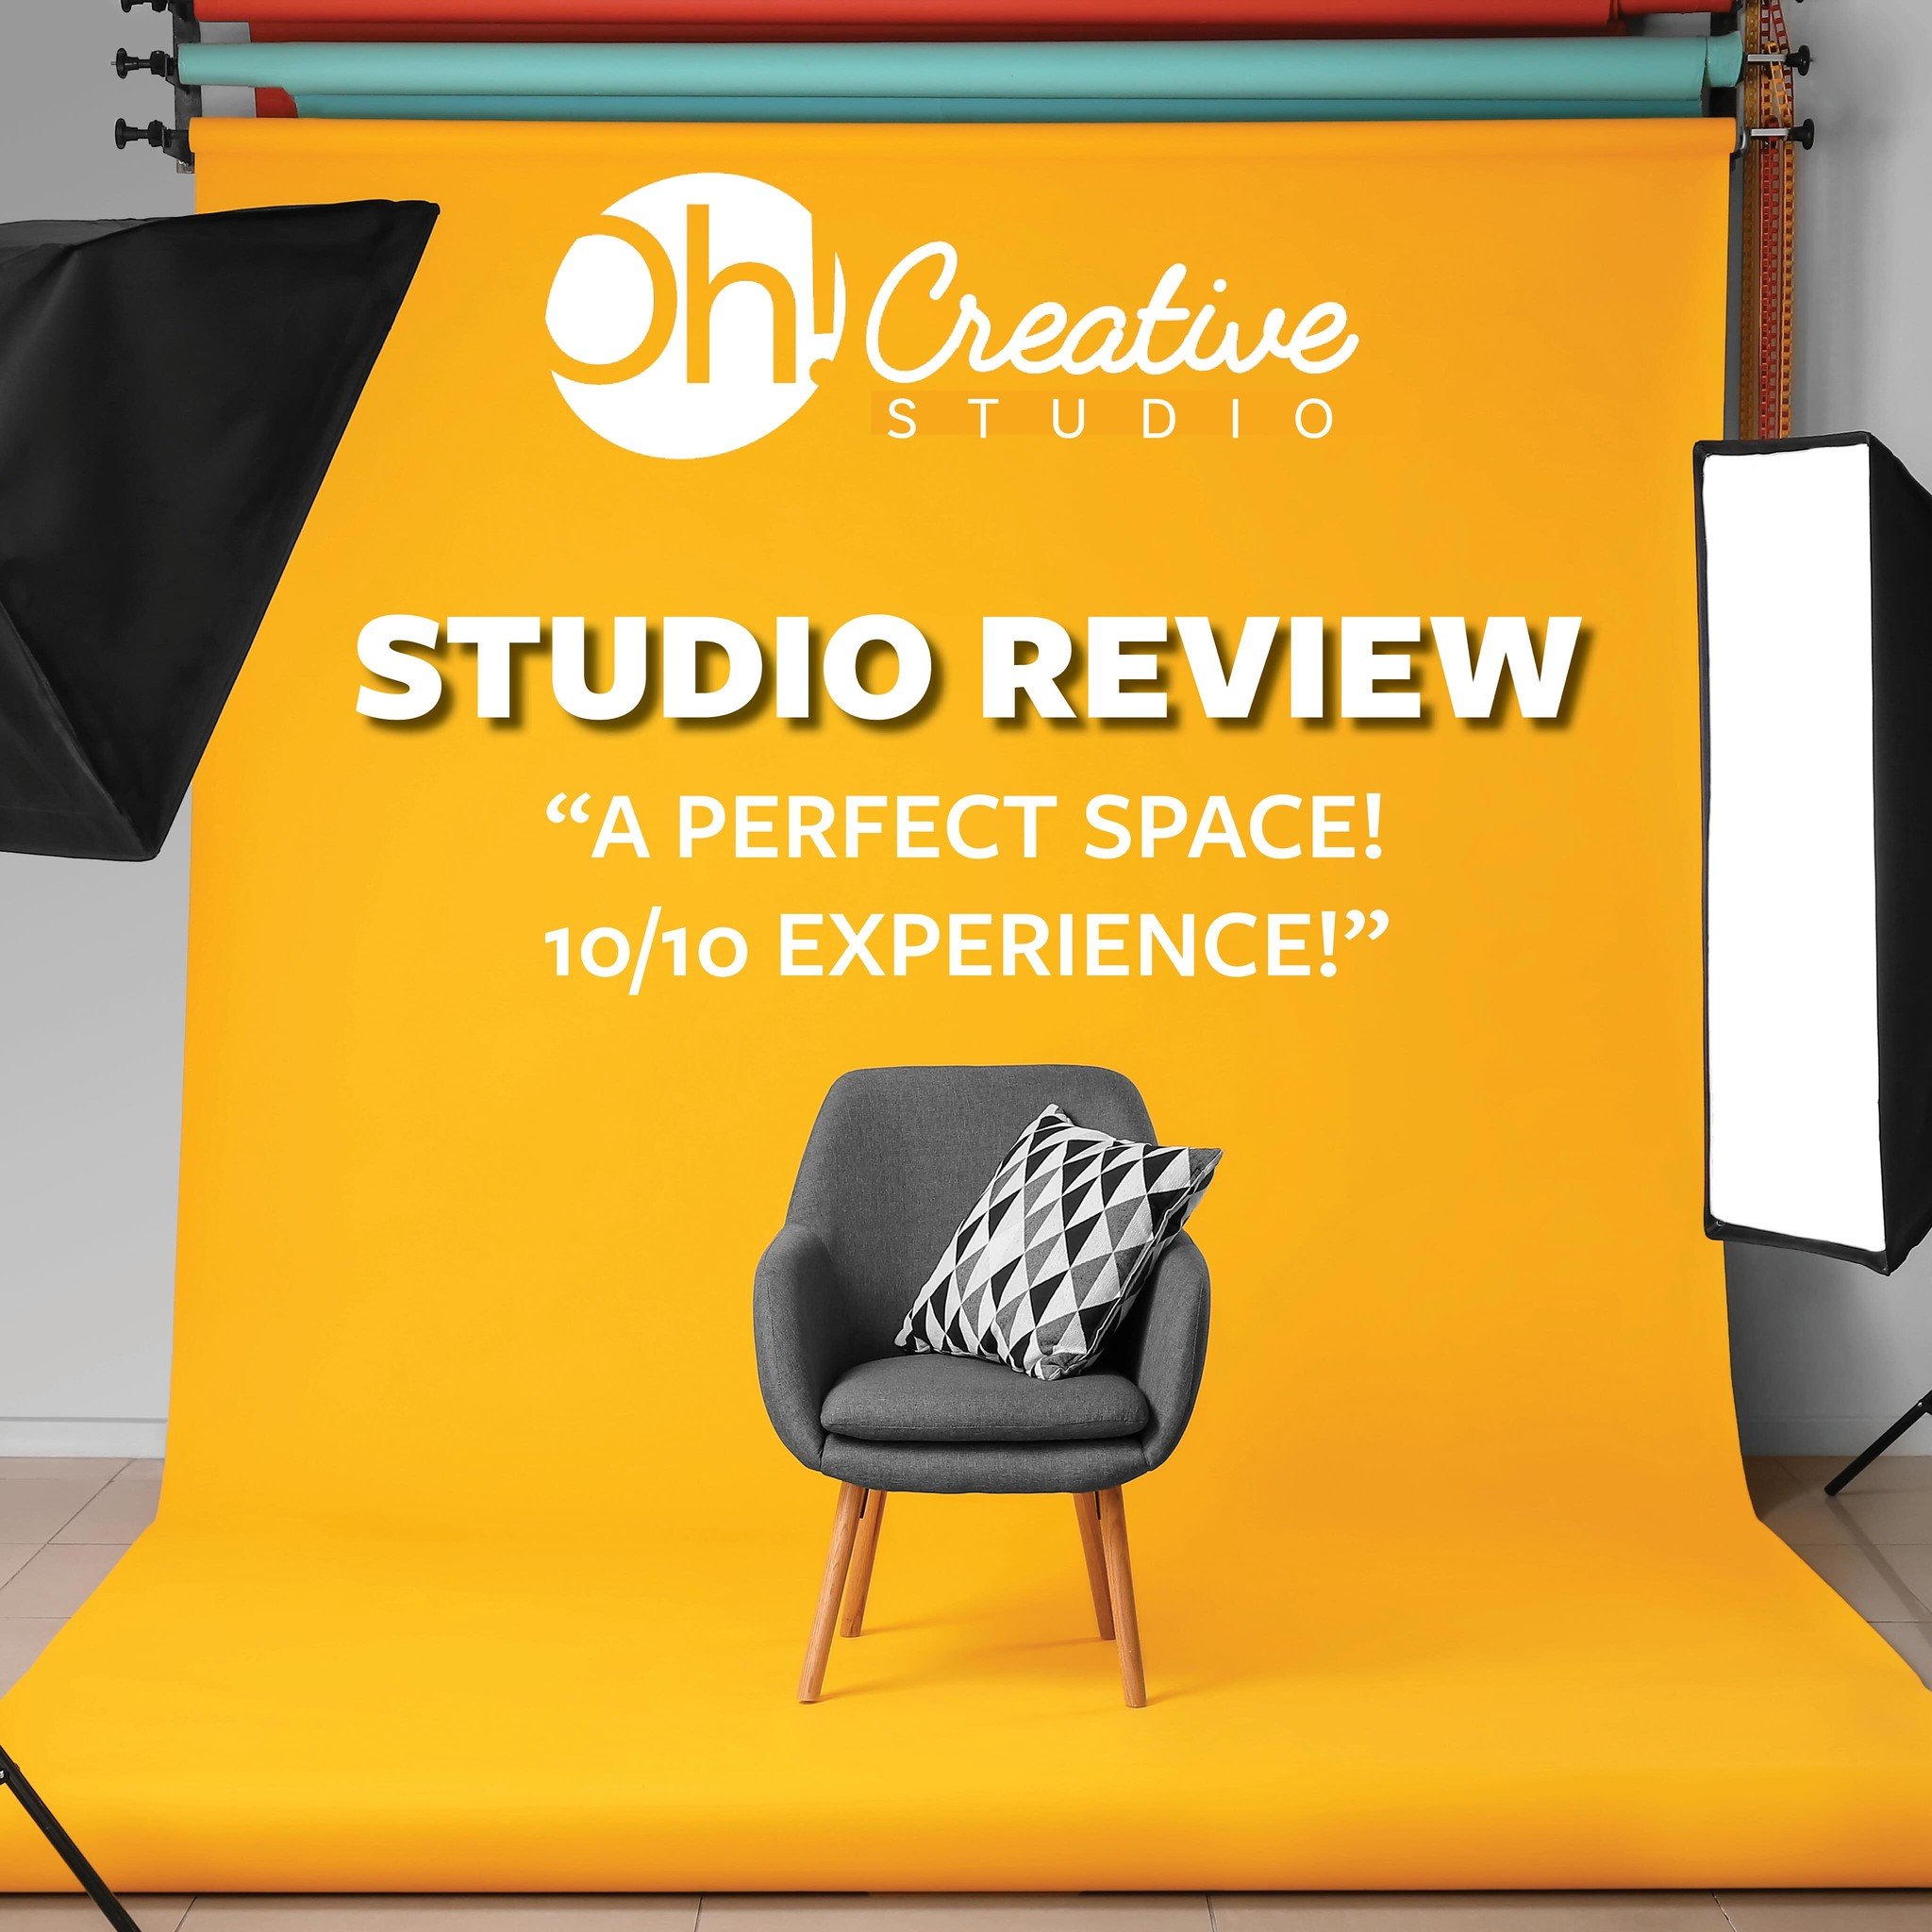 Another satisfied customer! Here&rsquo;s what one of our recent renters had to say about their experience at our studio:

&ldquo;I did a photoshoot here for my birthday and it was a perfect space for it! They provided lights, a space to change, black